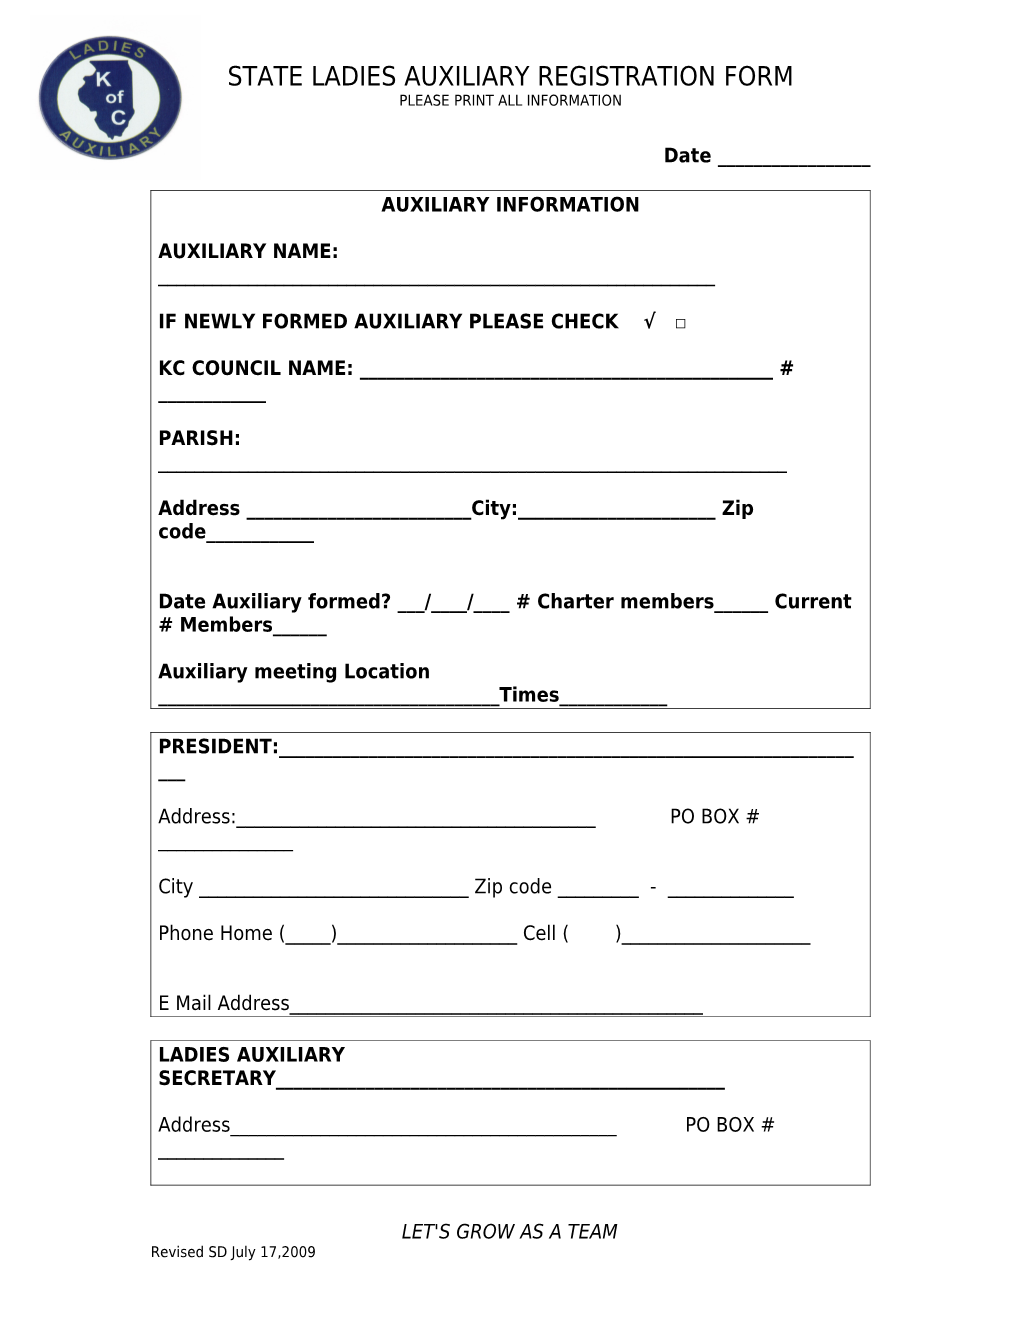 State Ladies Auxiliary Registration Form